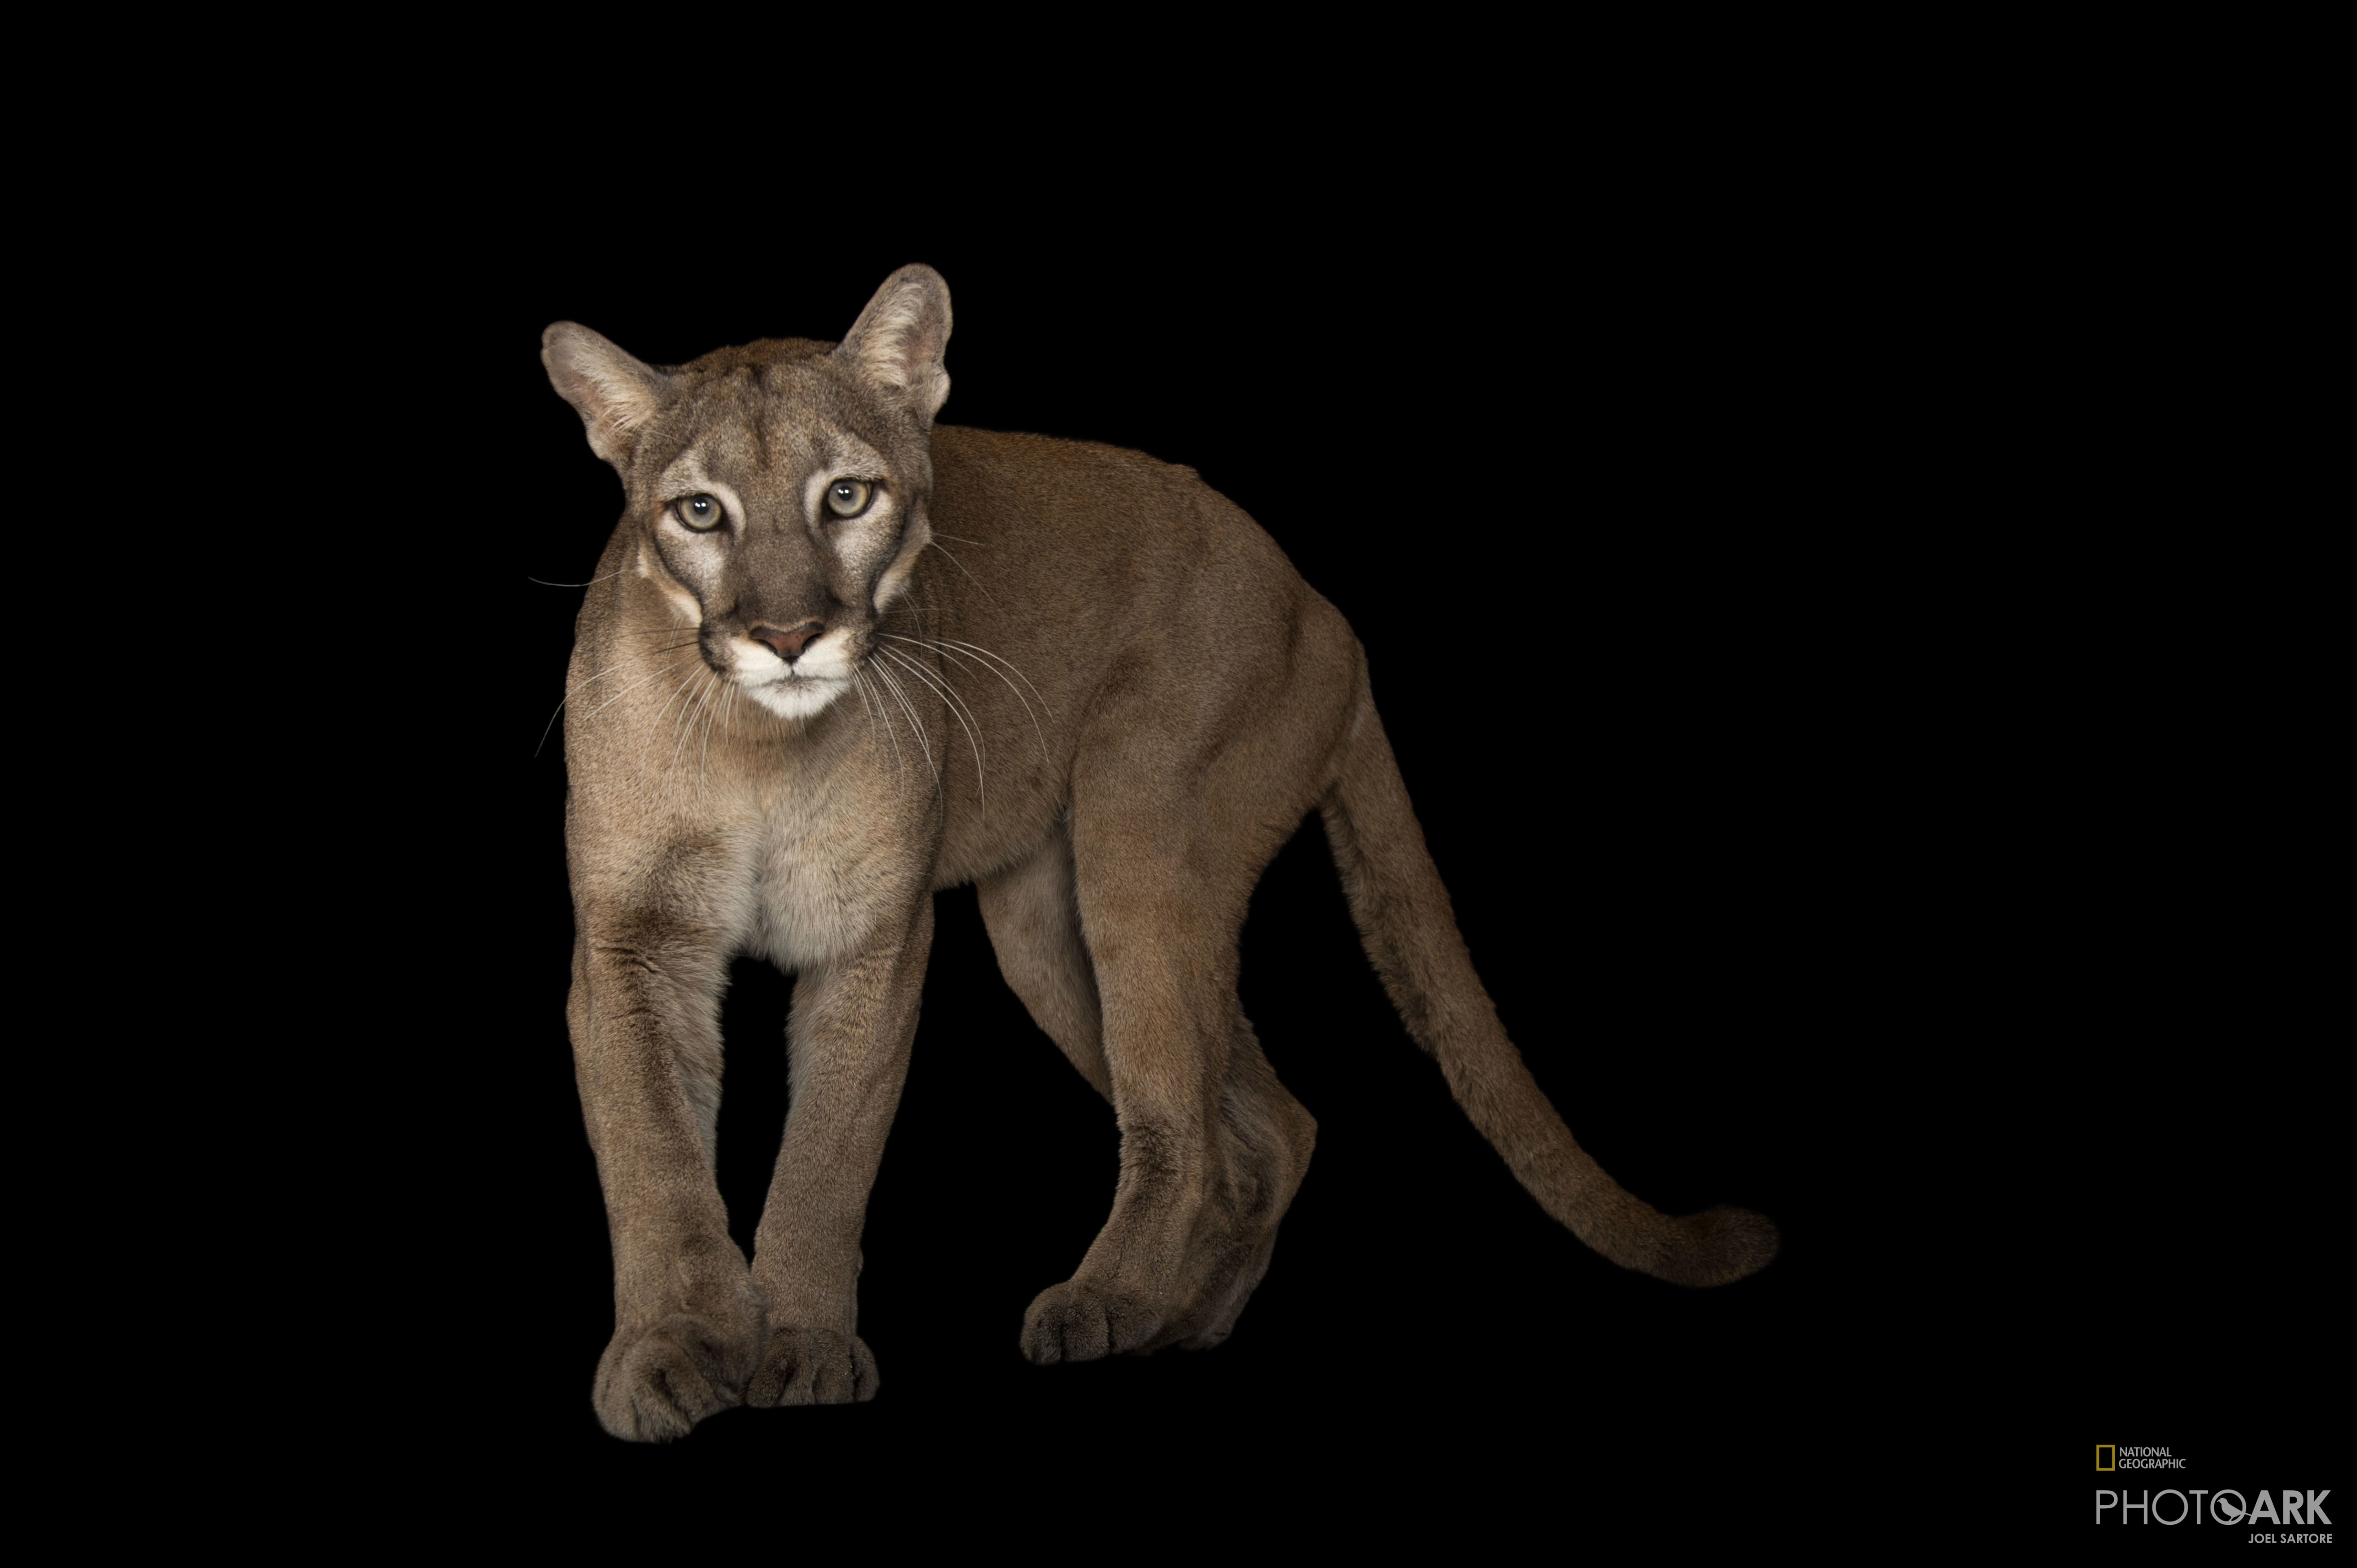 Photo Ark Home Federally Endangered Florida Panther | National Geographic  Society